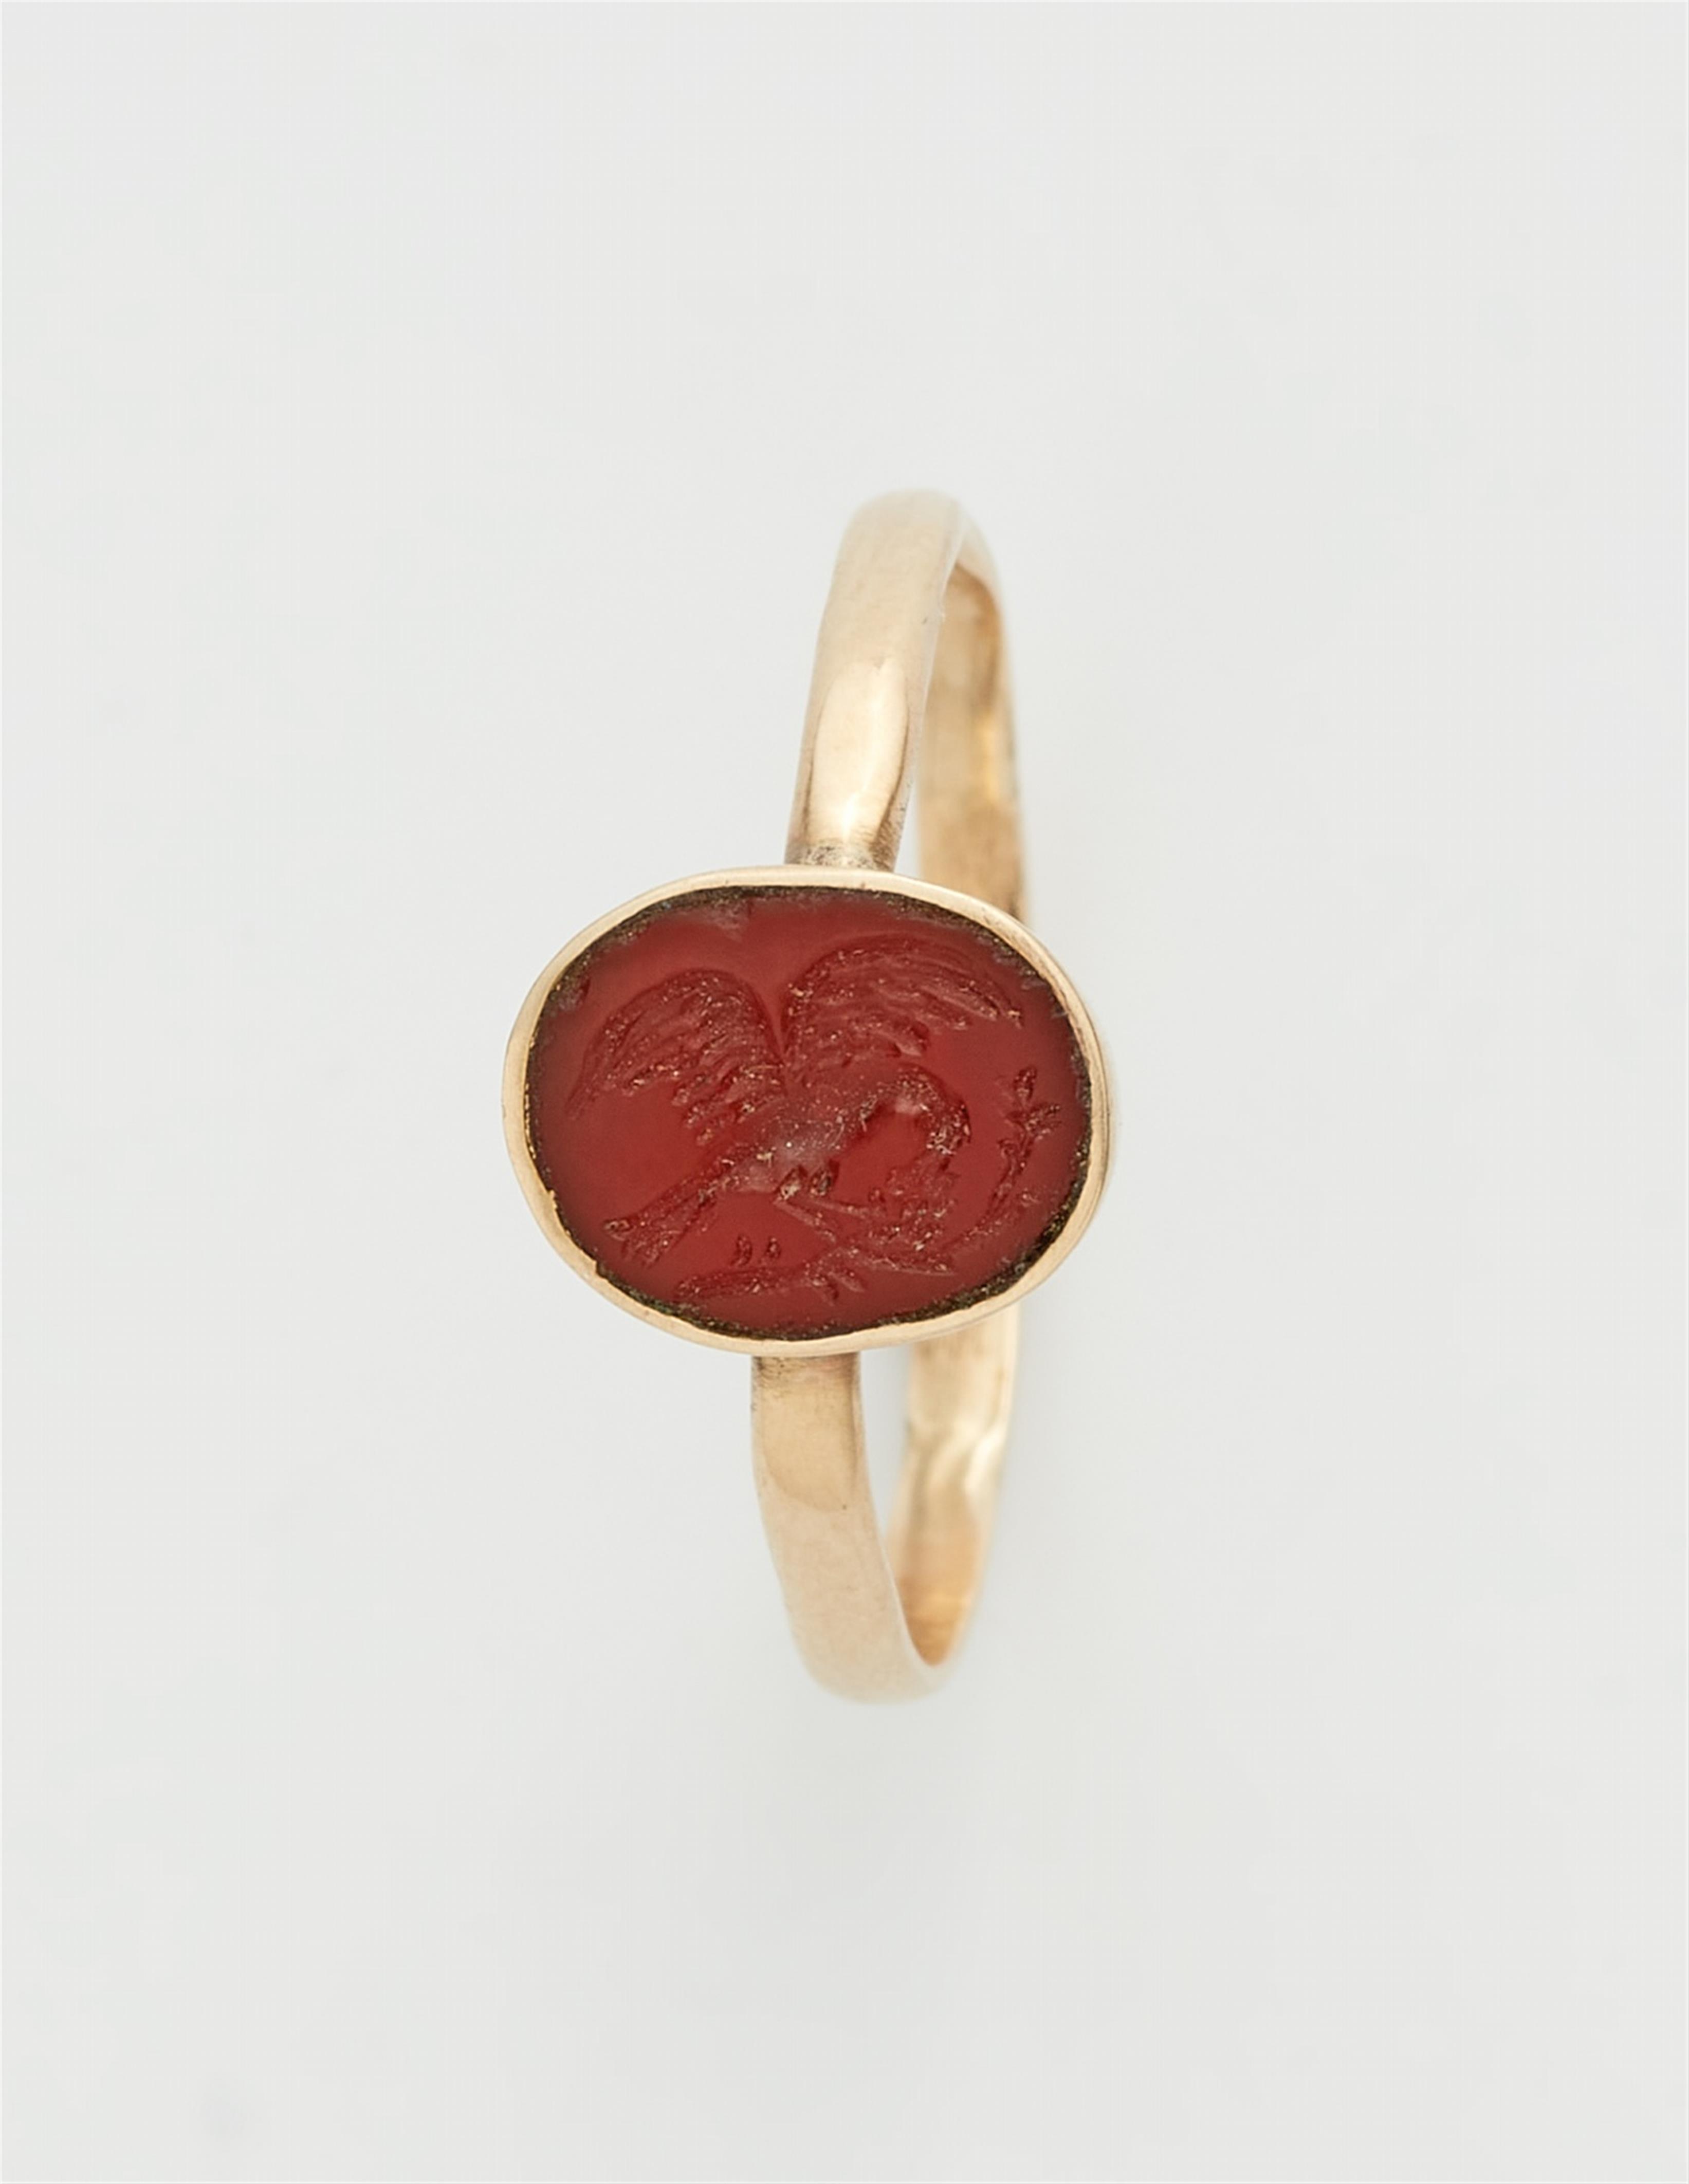 A 9k gold ring with a Roman intaglio - image-1